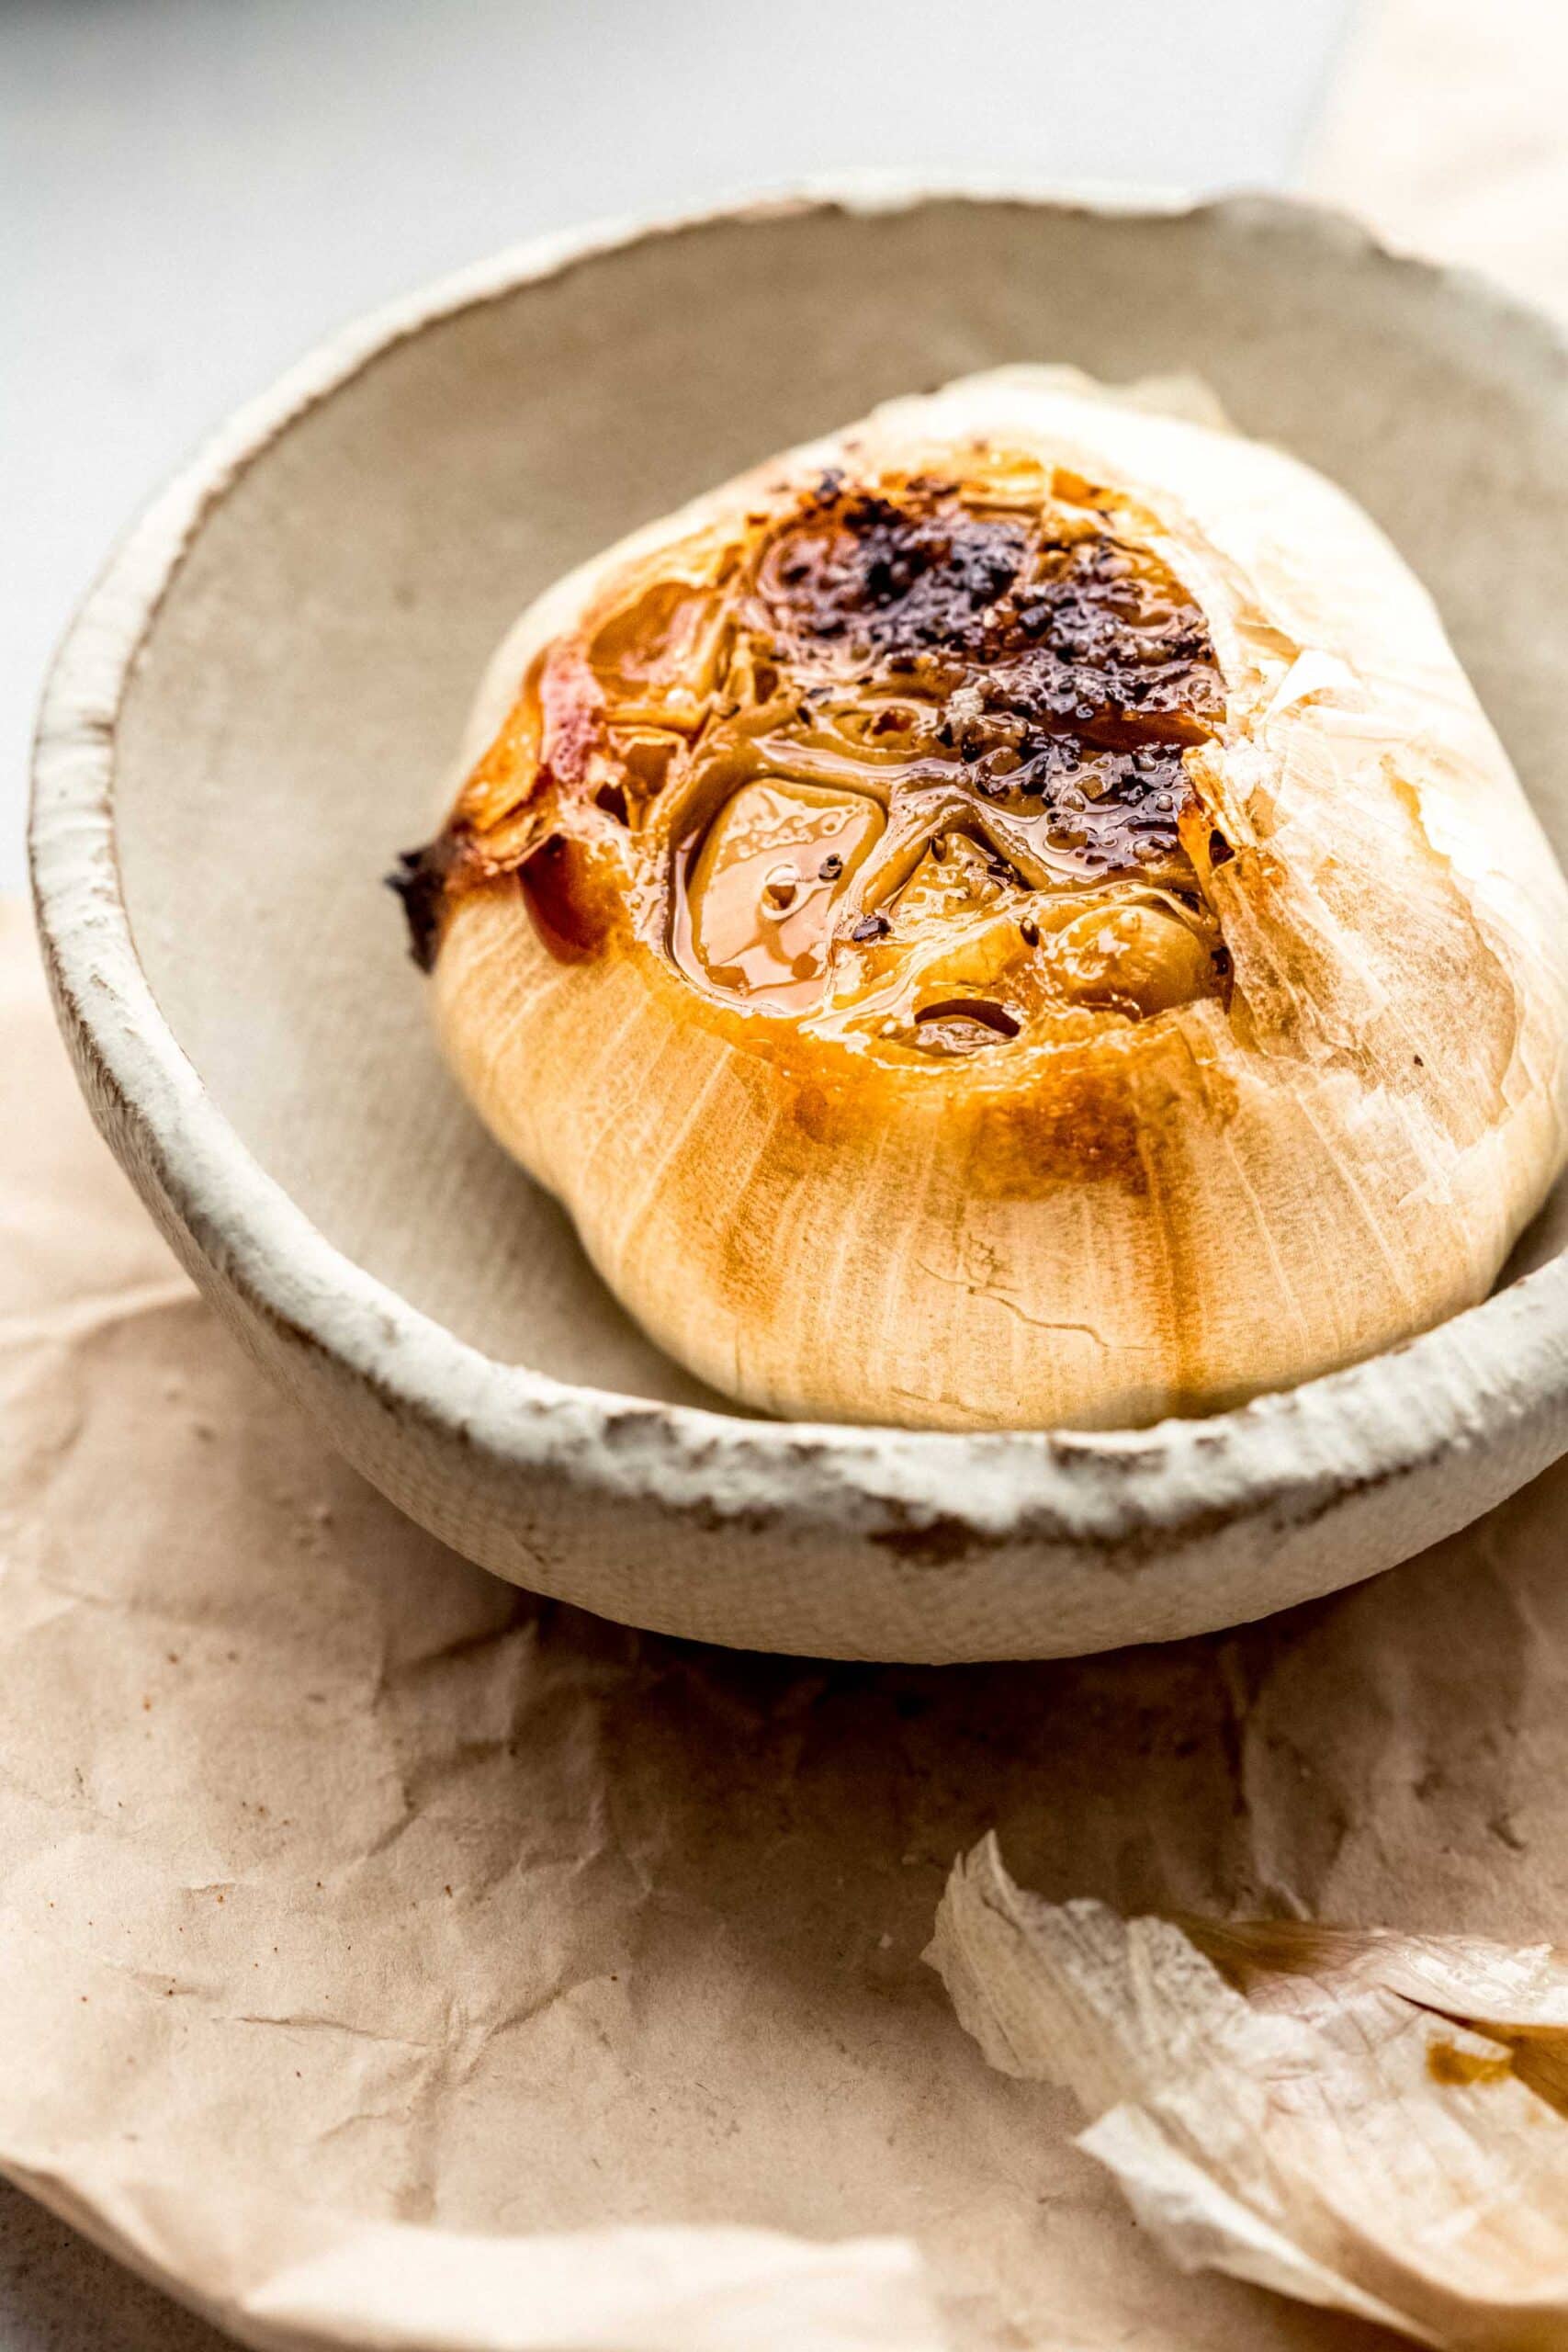 ROASTED GARLIC IN SMALL SERVING DISH.